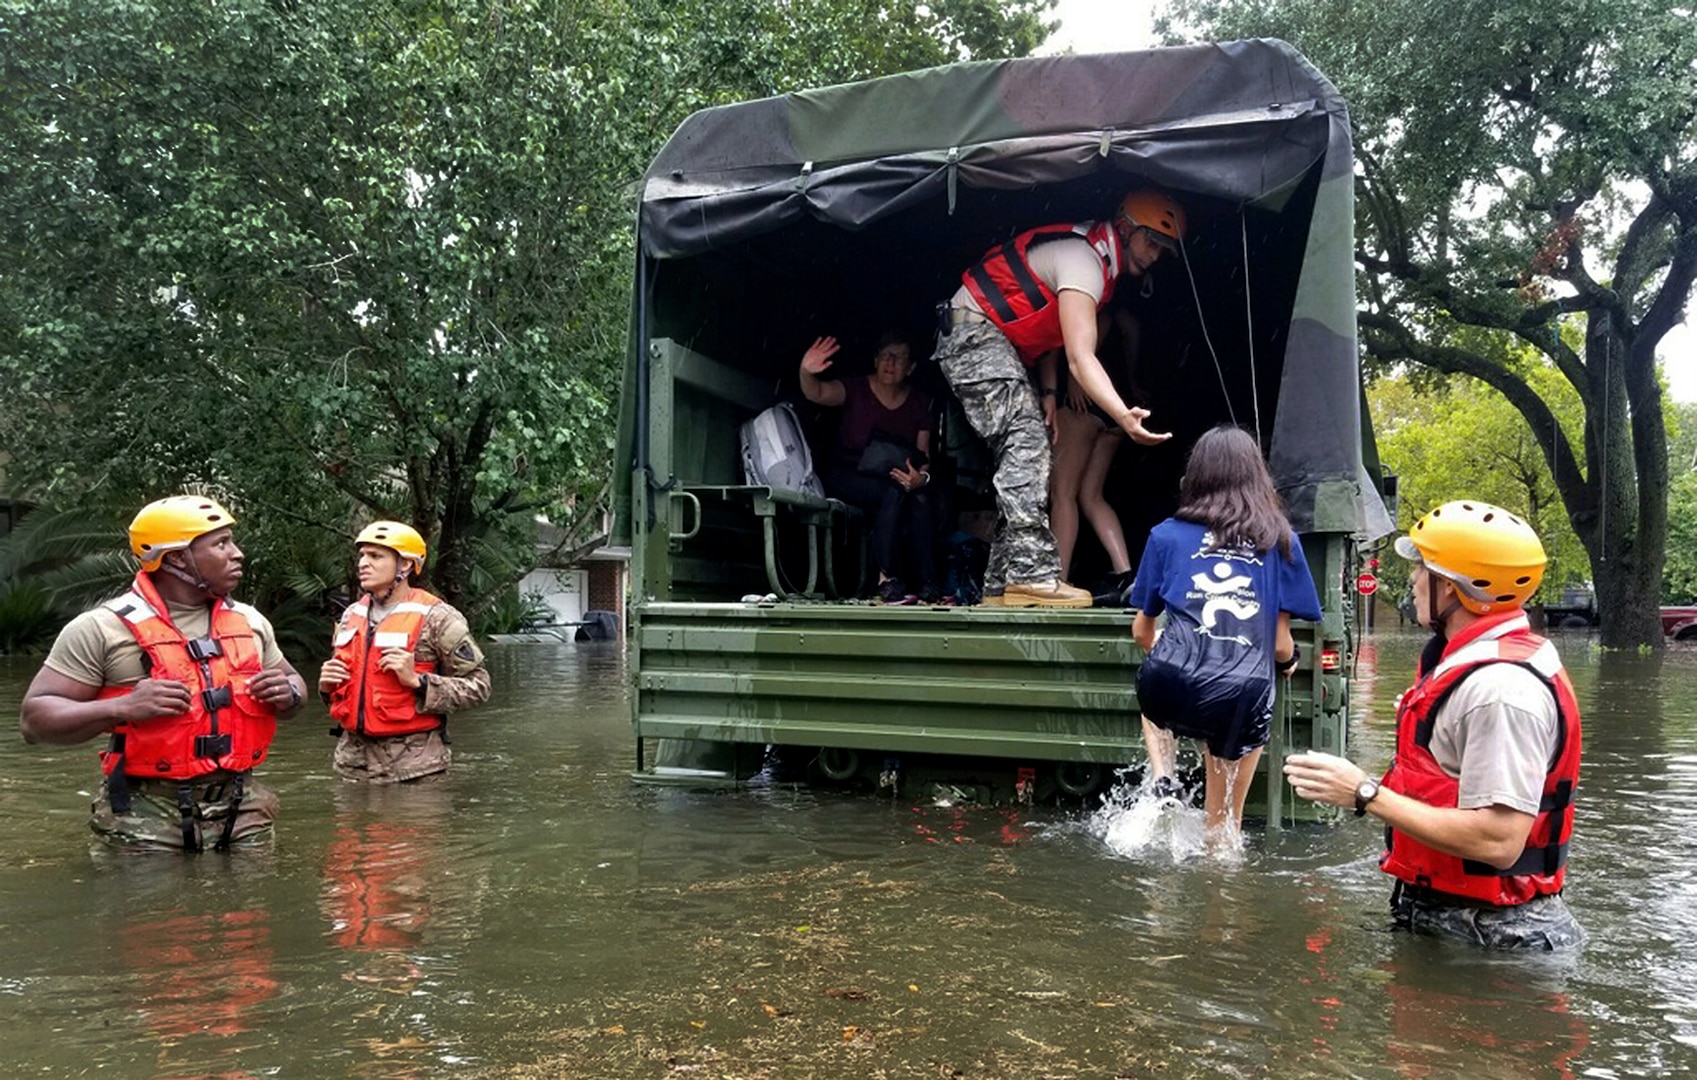 Texas Army National Guard Soldiers rescue Houston residents from floodwaters caused by Hurricane Harvey in 2017. As the 2020 hurricane season ramps up, National Guard members throughout the country stand ready to respond if needed.